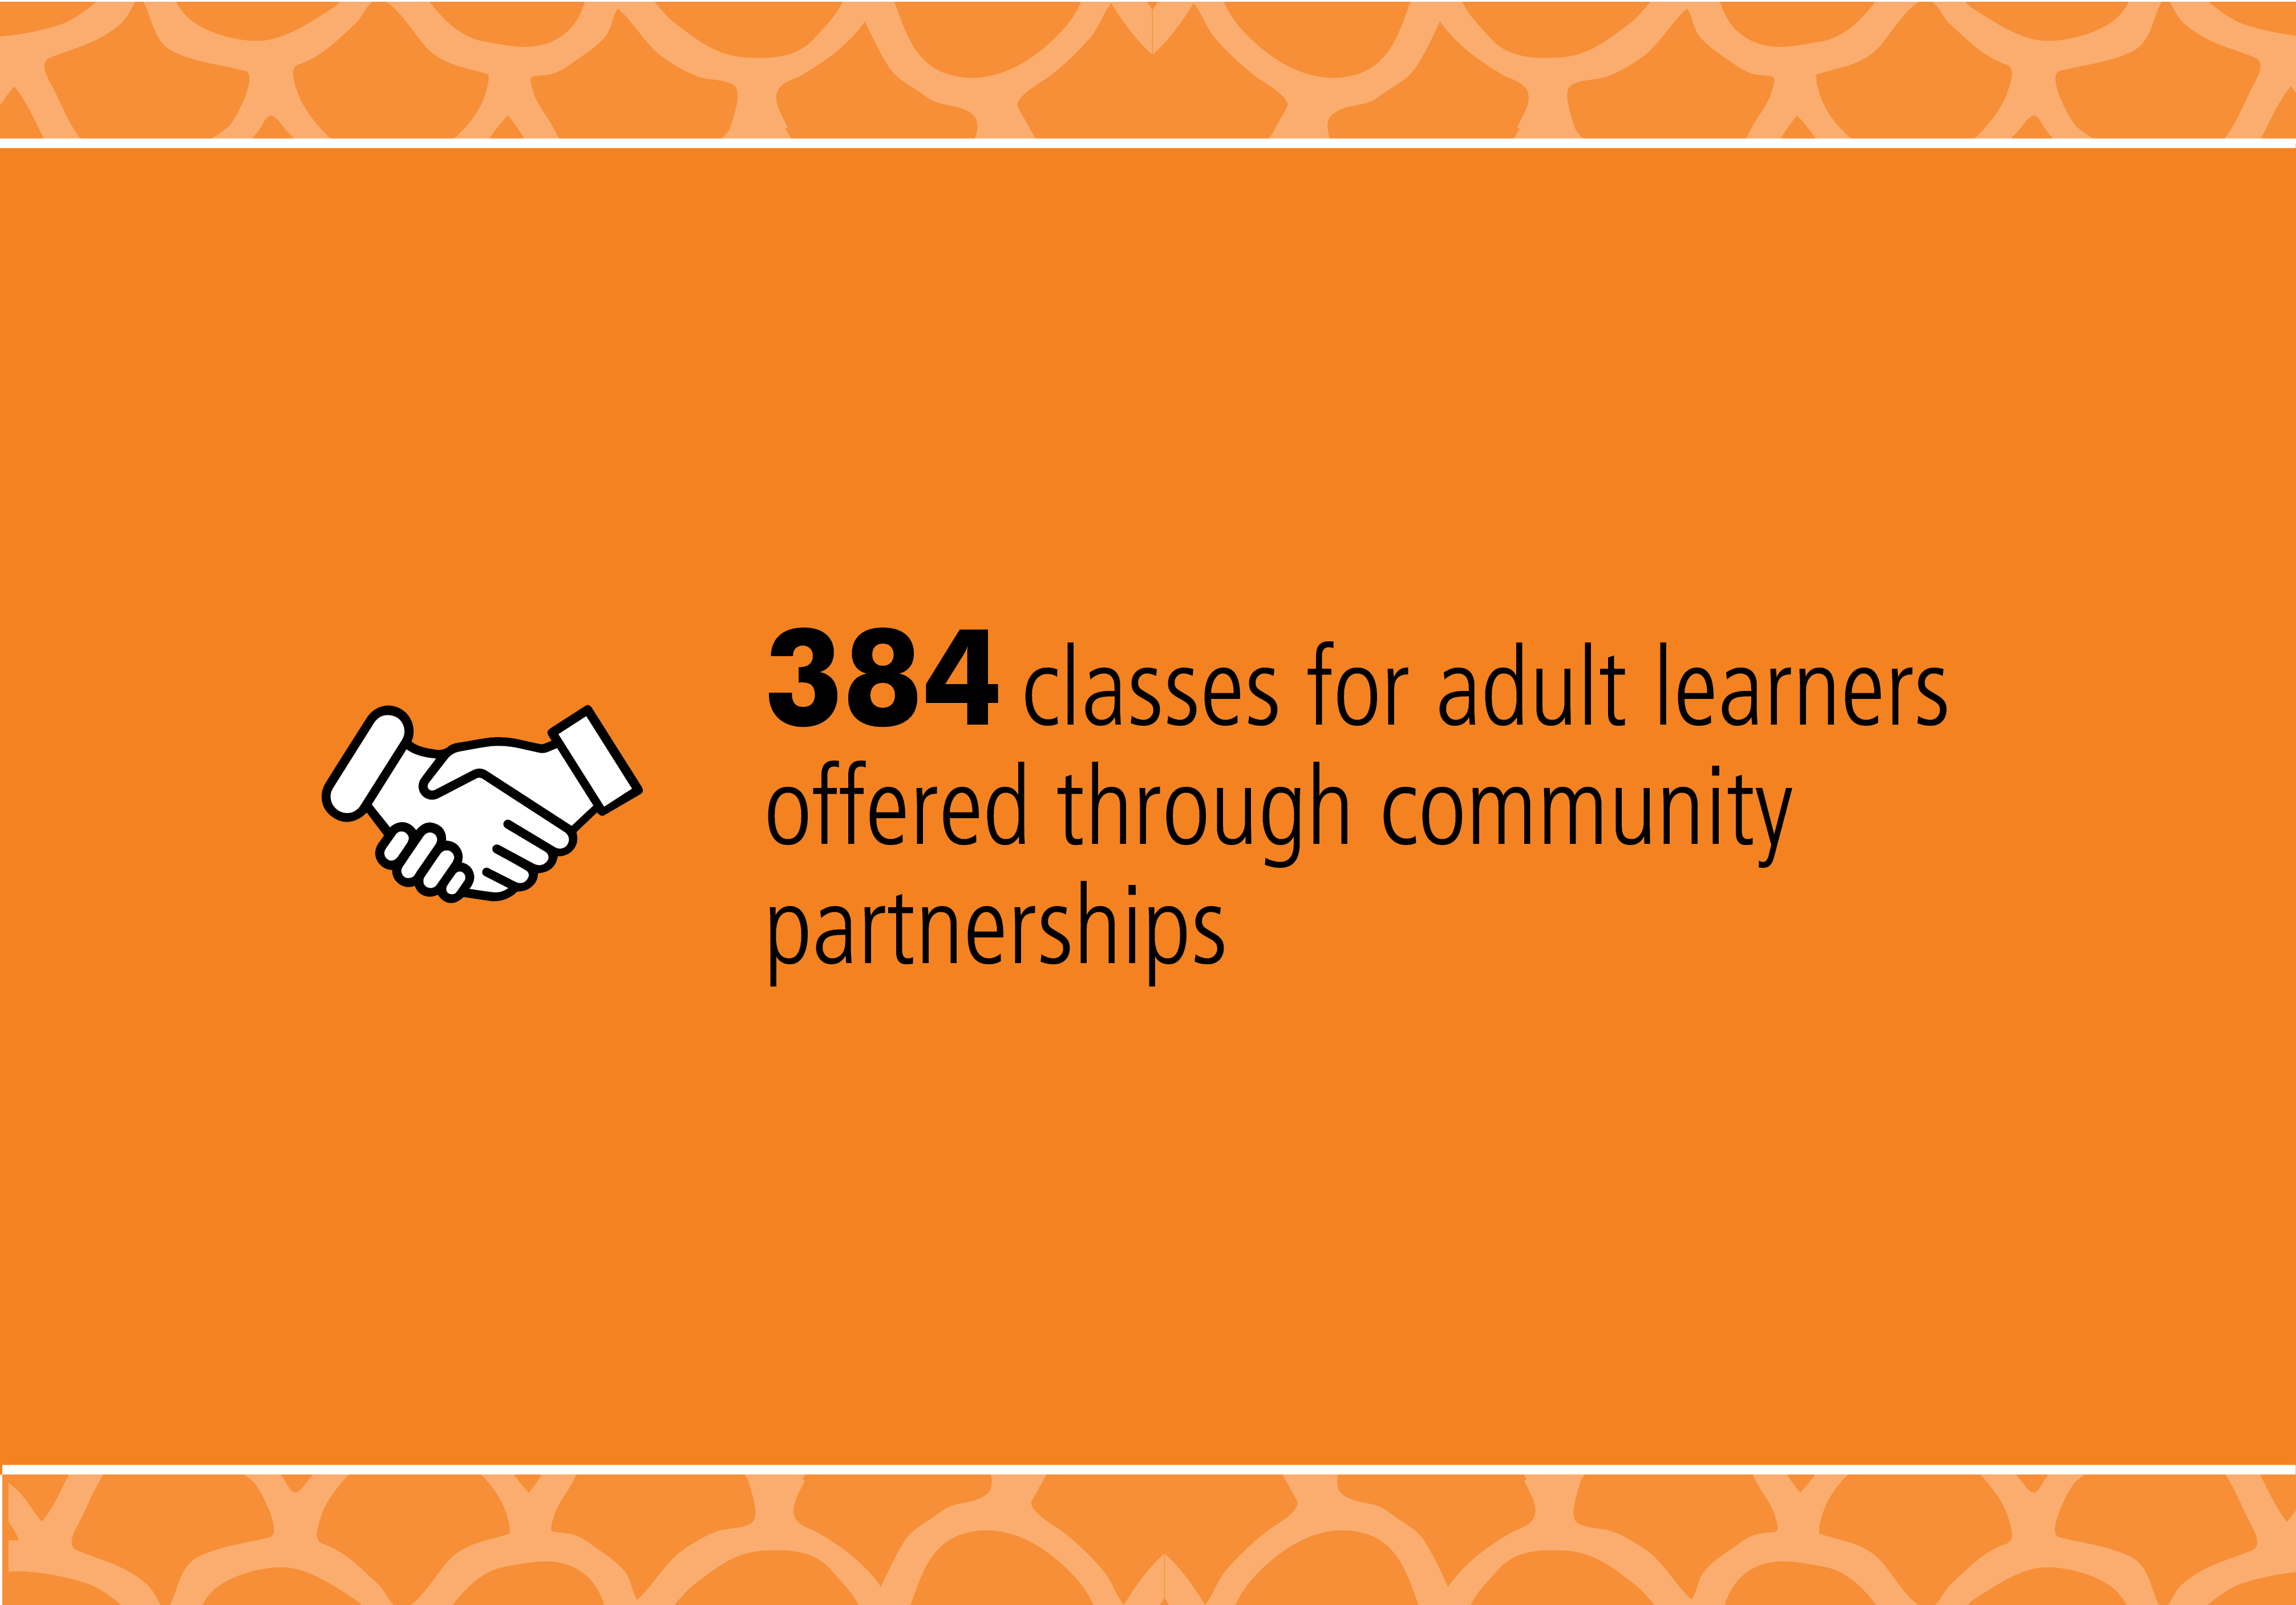 384 classes for adult learners offered through community partnerships